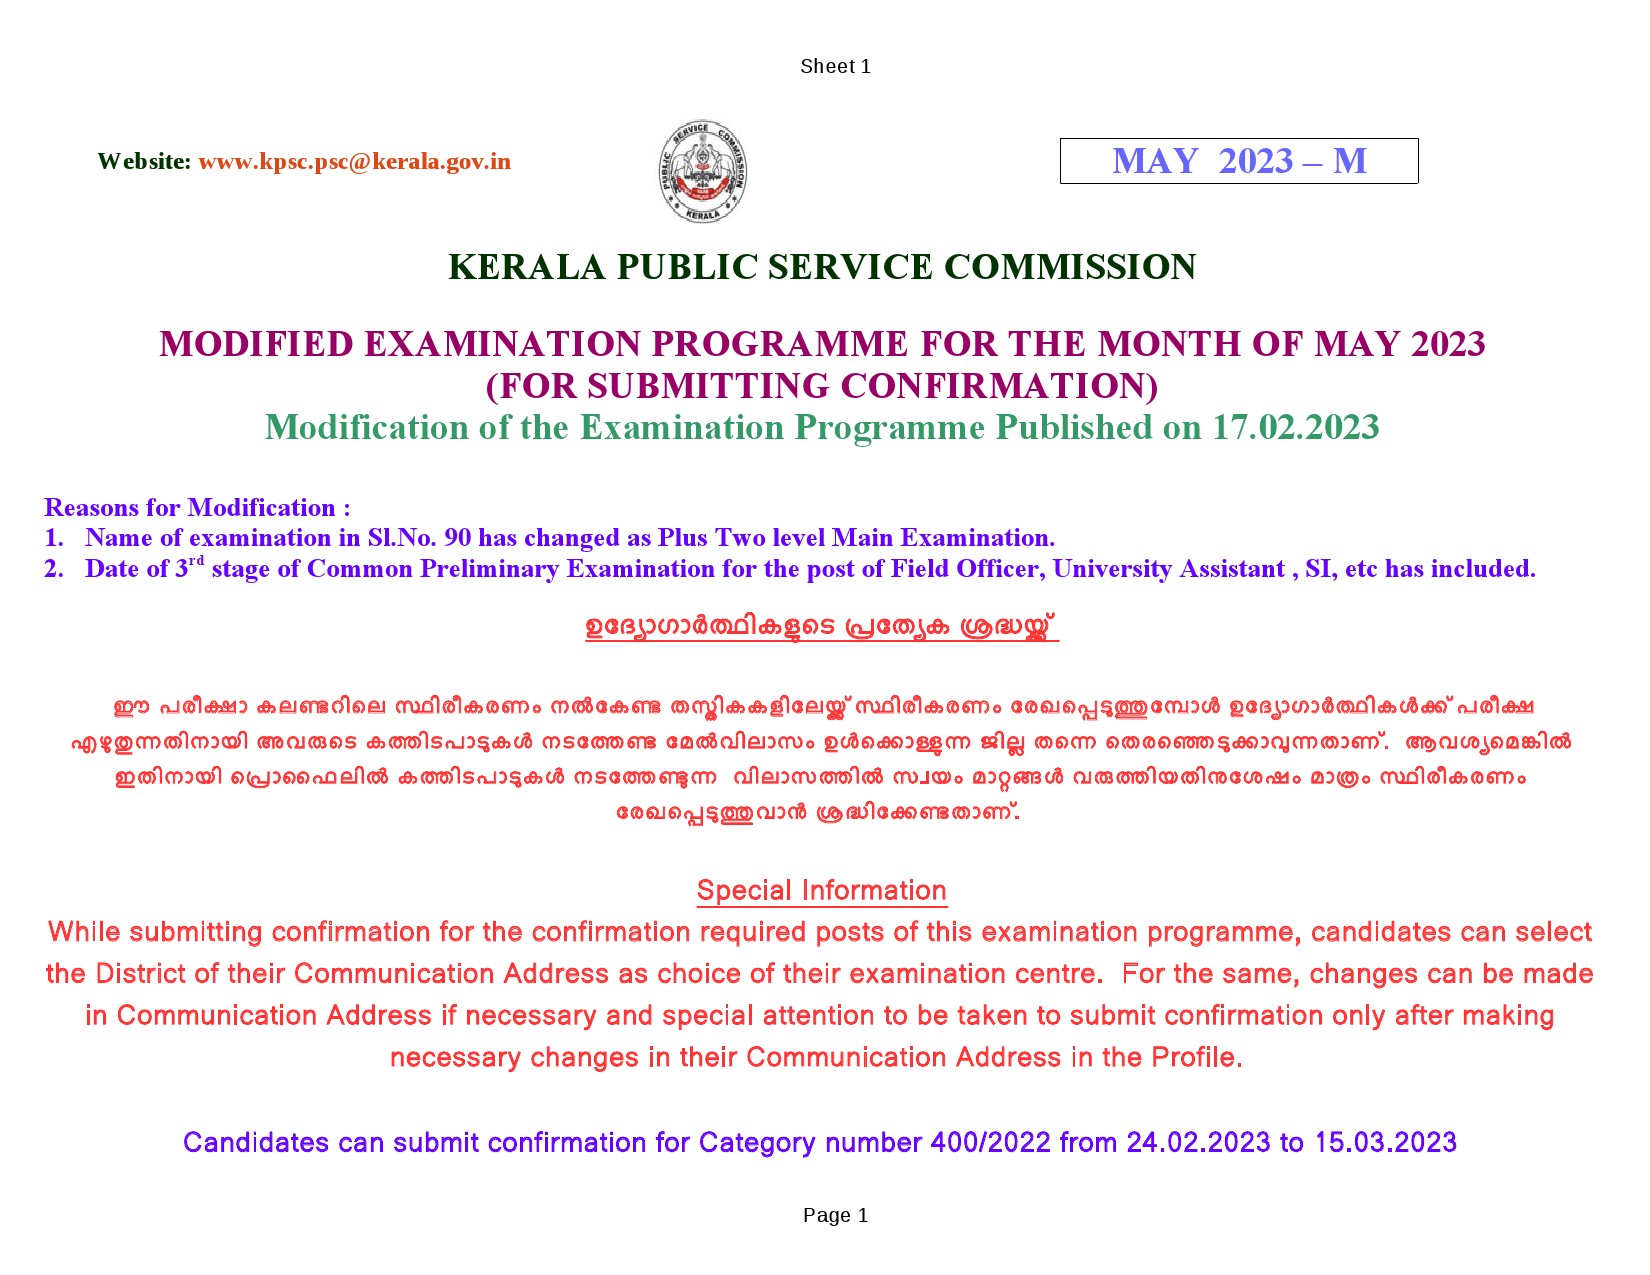 Modified Examination Programme For The Month Of May 2023 - Notification Image 1